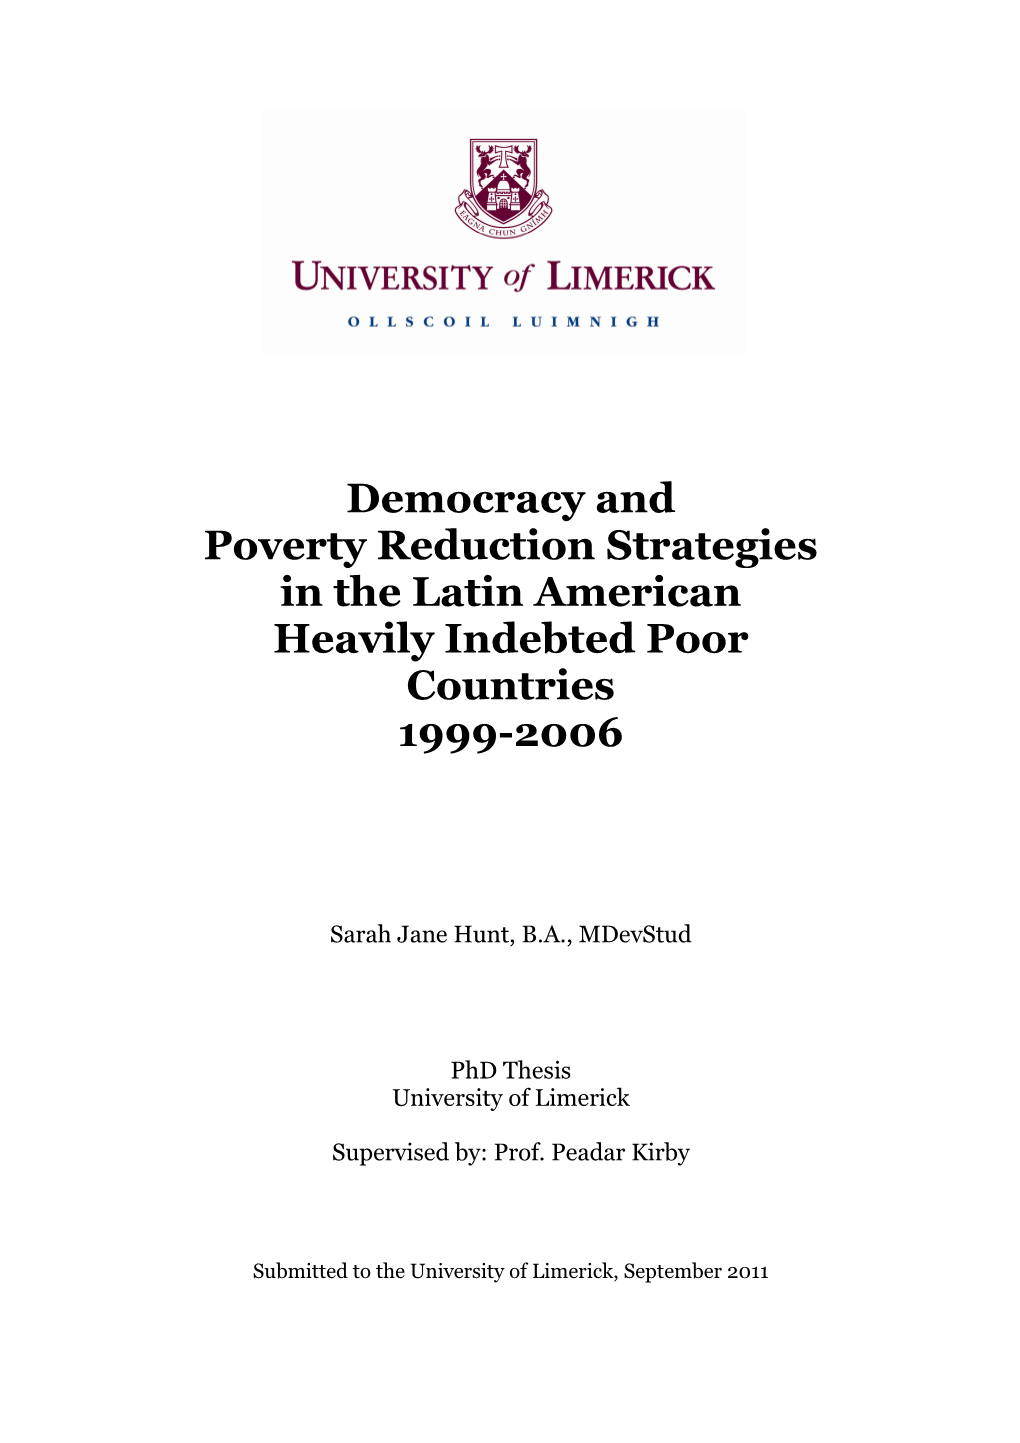 Democracy and Poverty Reduction Strategies in the Latin American Heavily Indebted Poor Countries 1999-2006